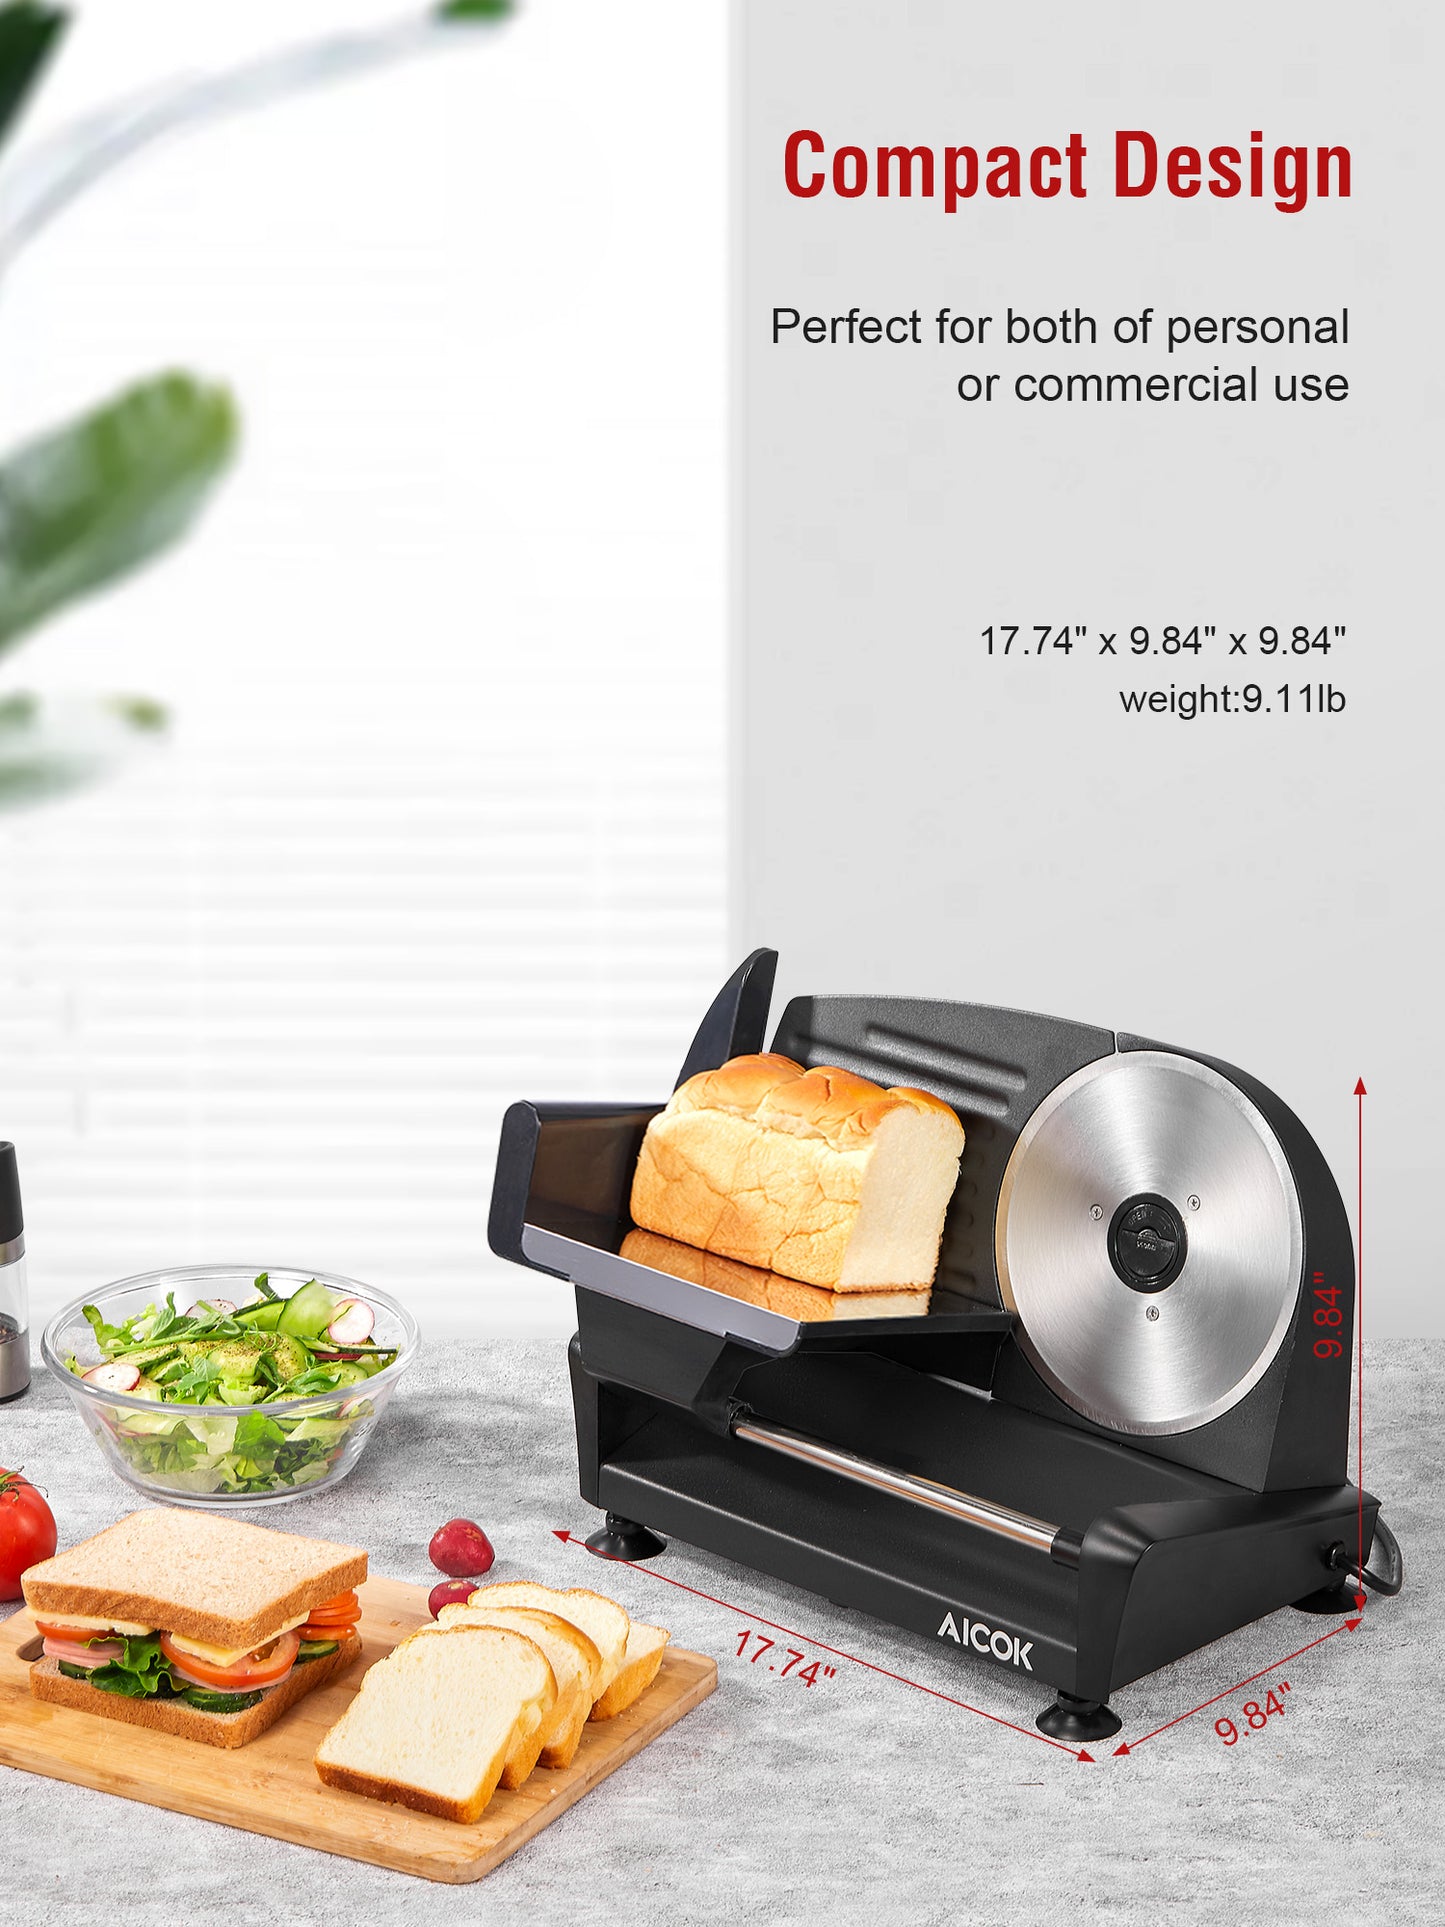 Aicok Home Use Meat Slicer, 200W Electric Deli & Food Slicer Home Use, 0-15mm Adjustable Thickness Food Slicer Machine Cut Meat, Cheese, Bread, compact design,SL-519N